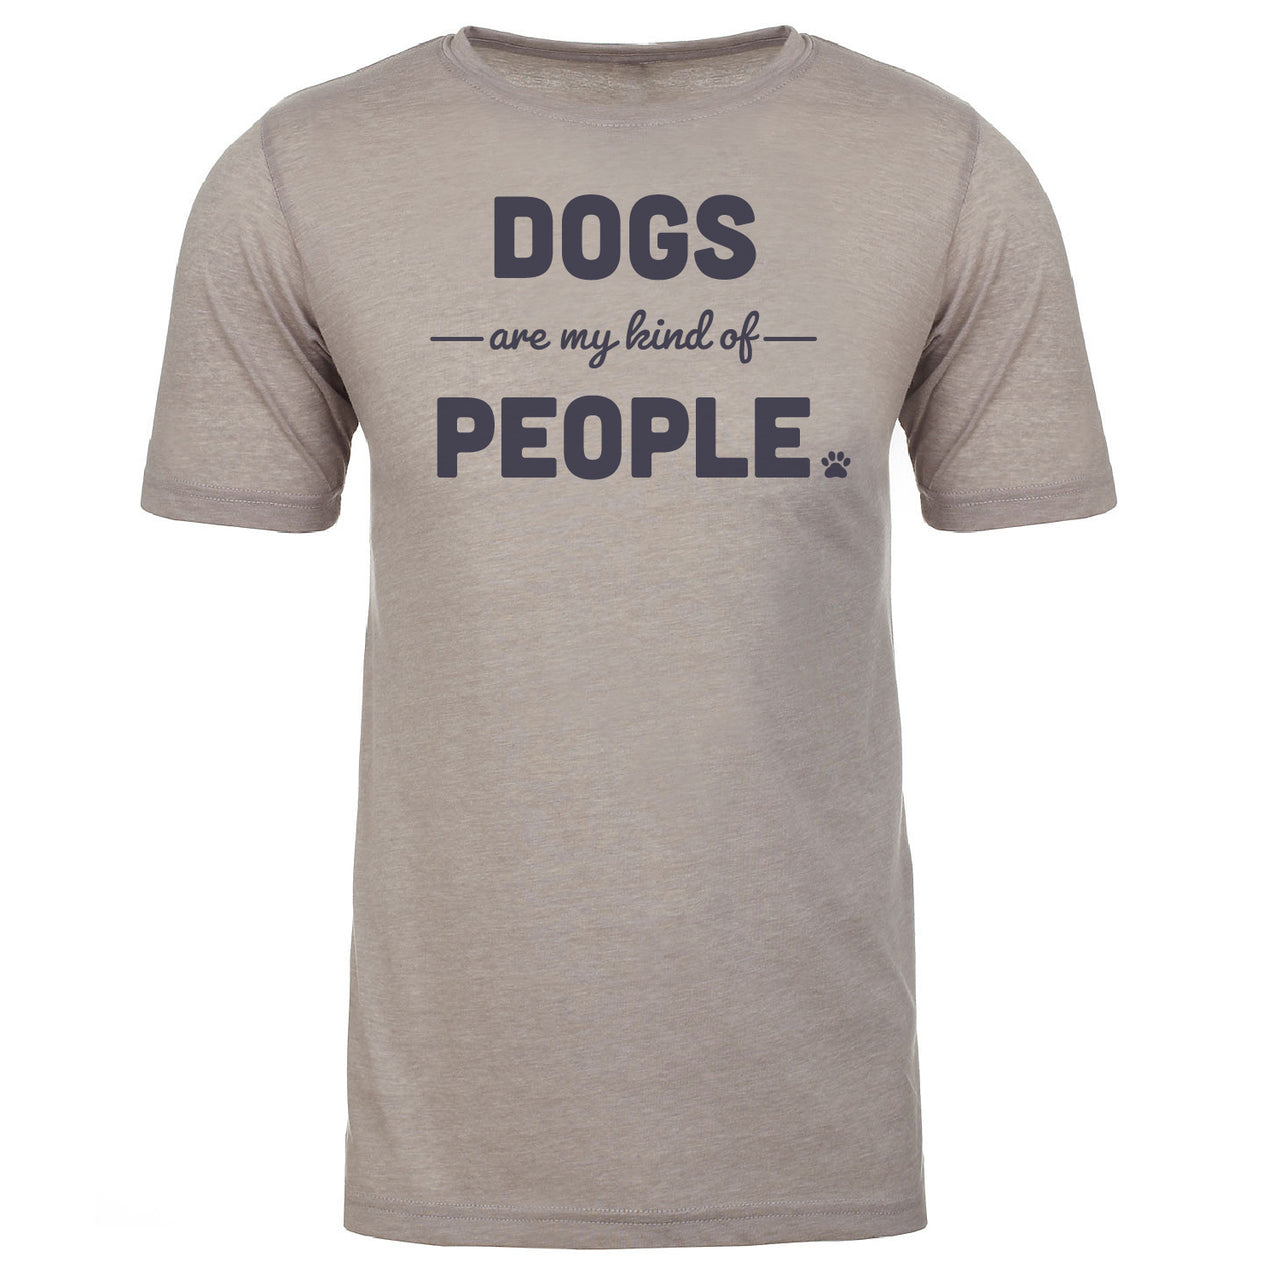 T-shirt for Dog People, front says Dogs are my kind of people